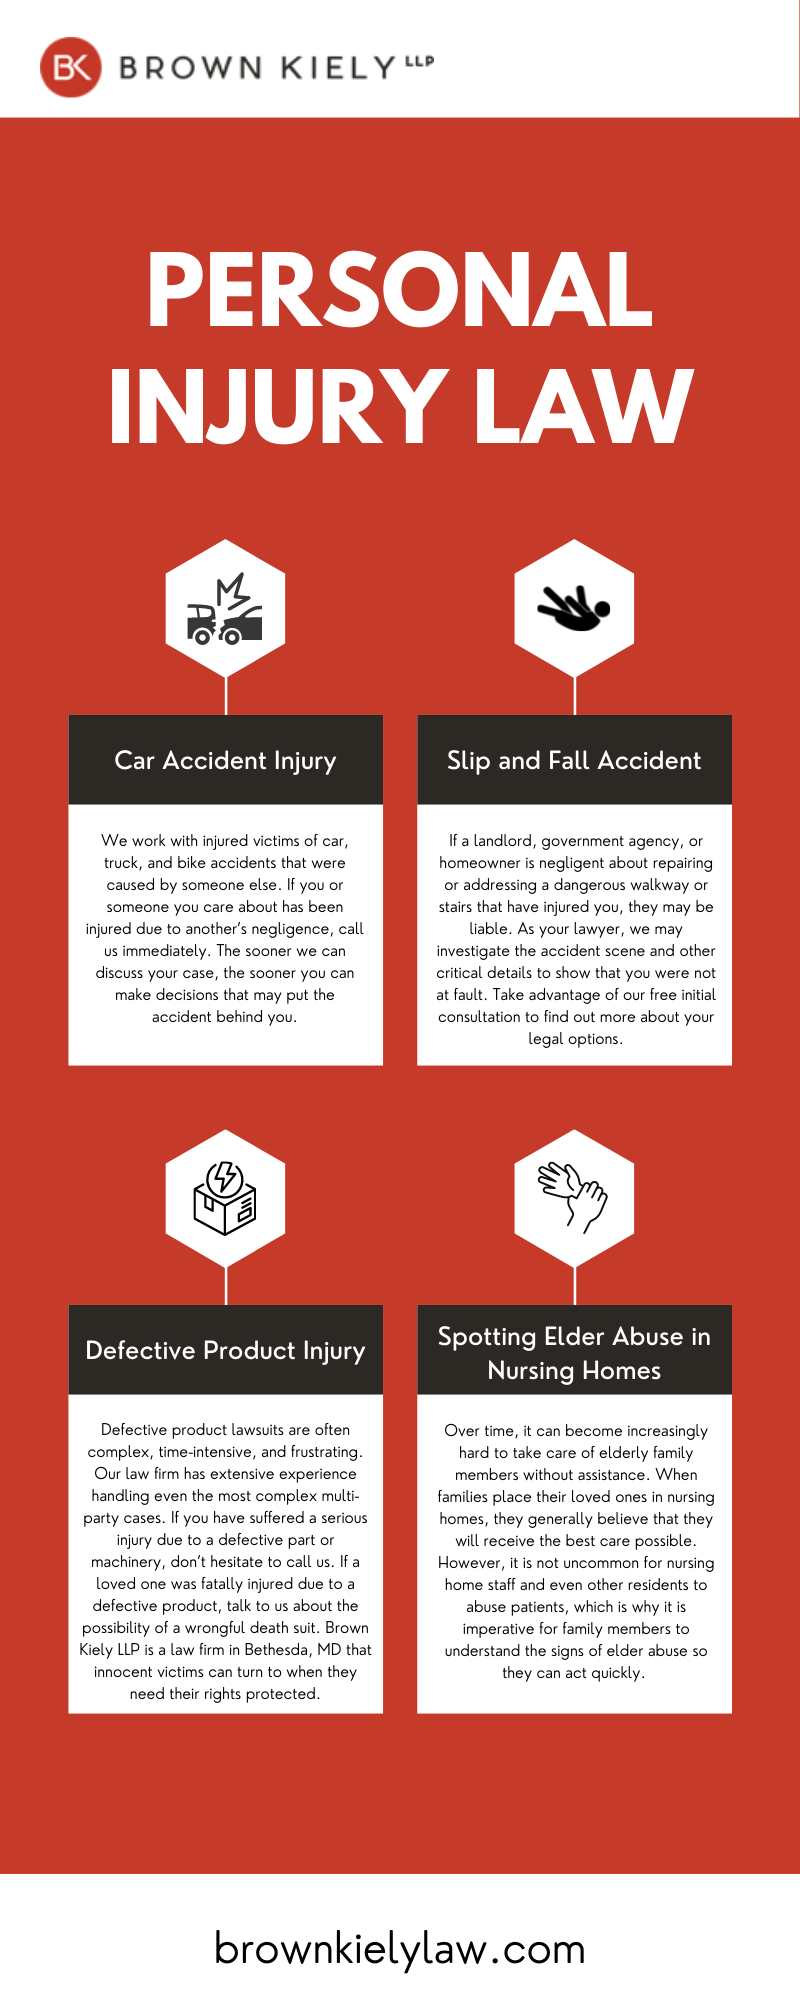 Personal Injury Law Infographic